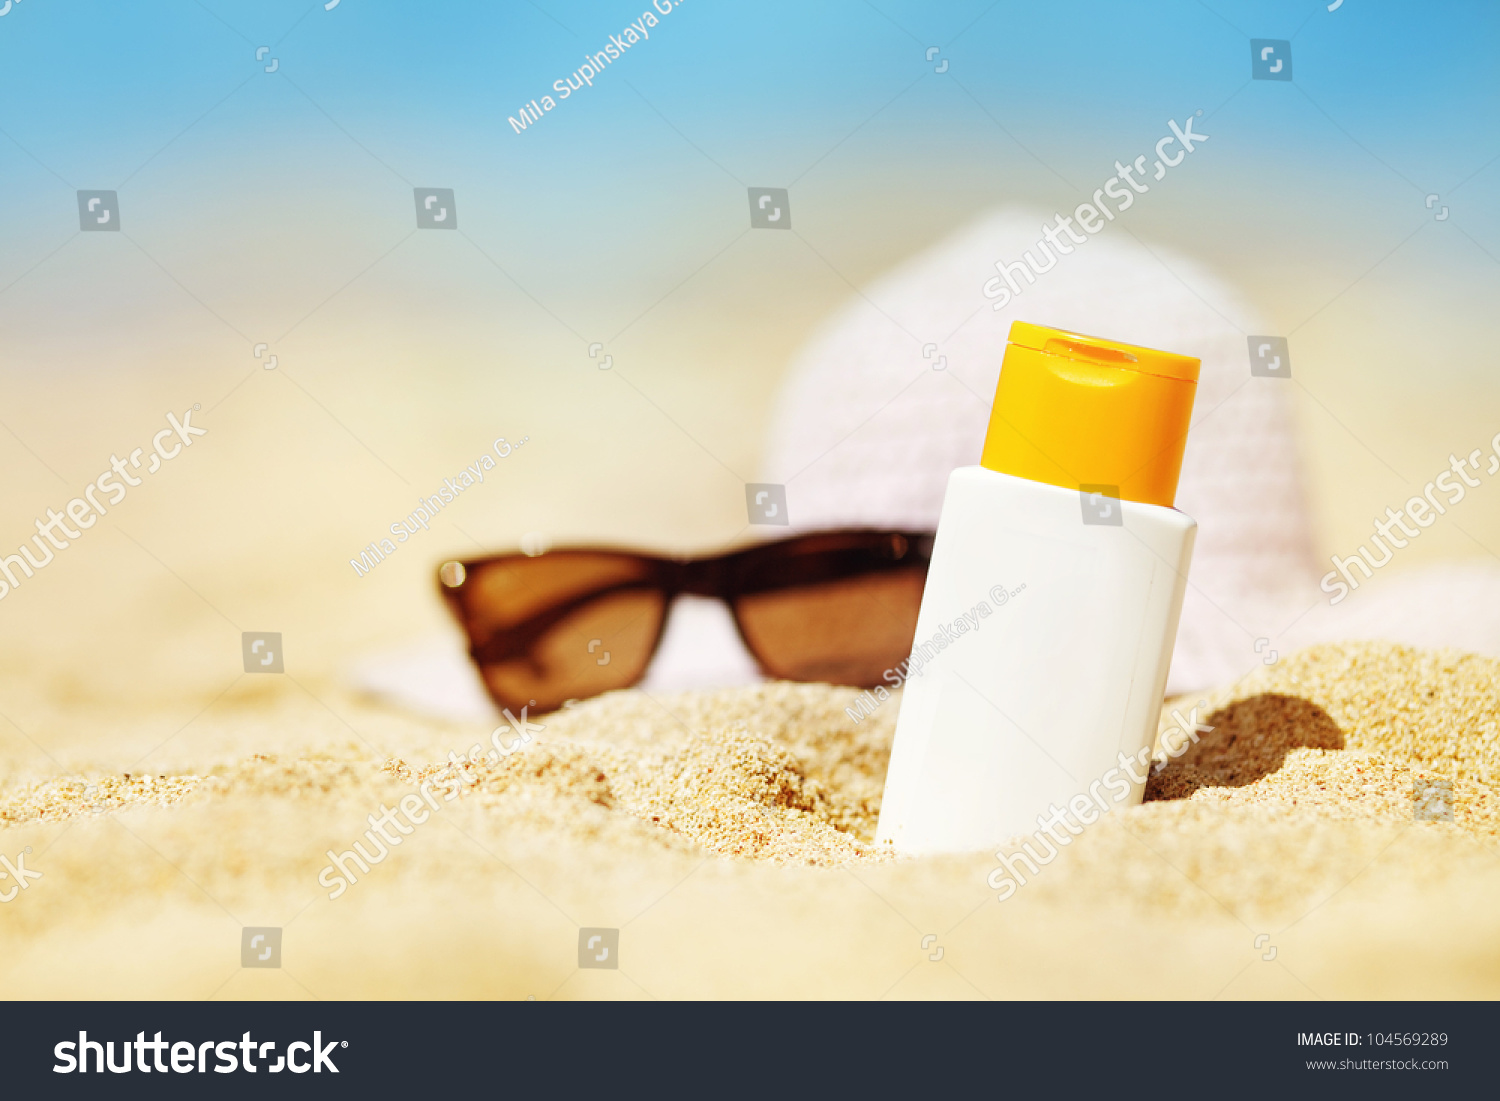 Bottle Of Sunscreen Lotion On The Sandy Beach Stock Photo 104569289 ...